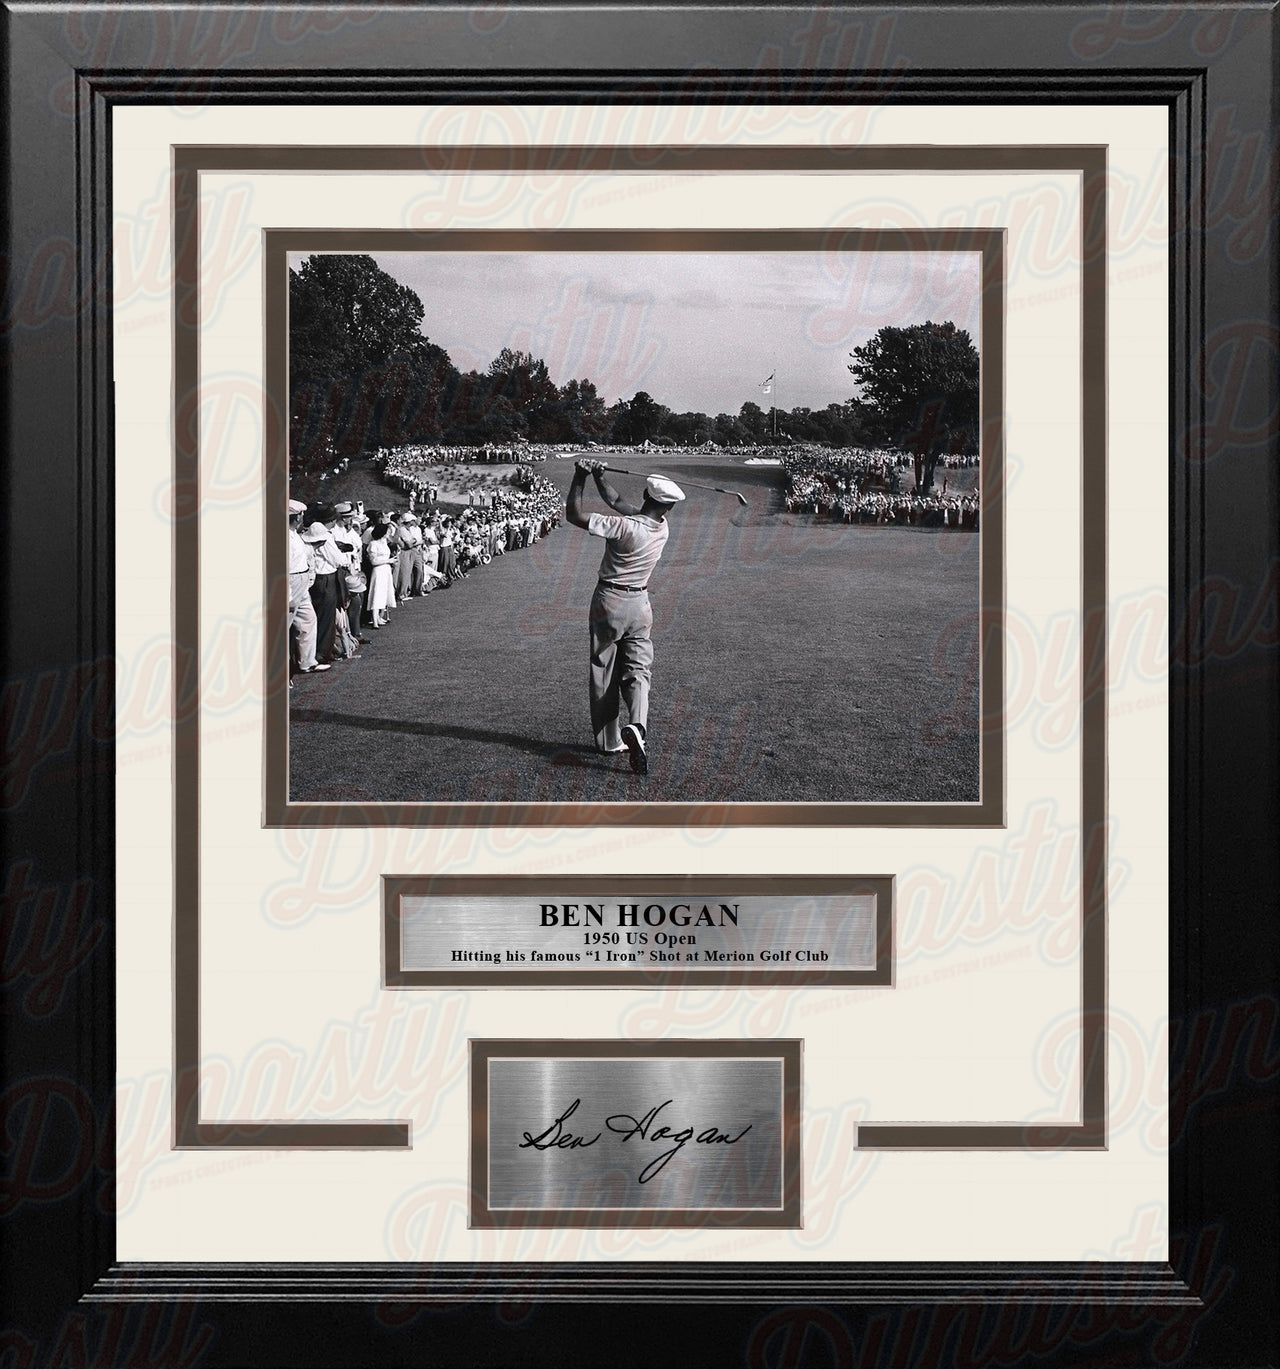 Ben Hogan 1-Iron Shot at the 1950 US Open at Merion Framed Golf Photo with Engraved Autograph - Dynasty Sports & Framing 